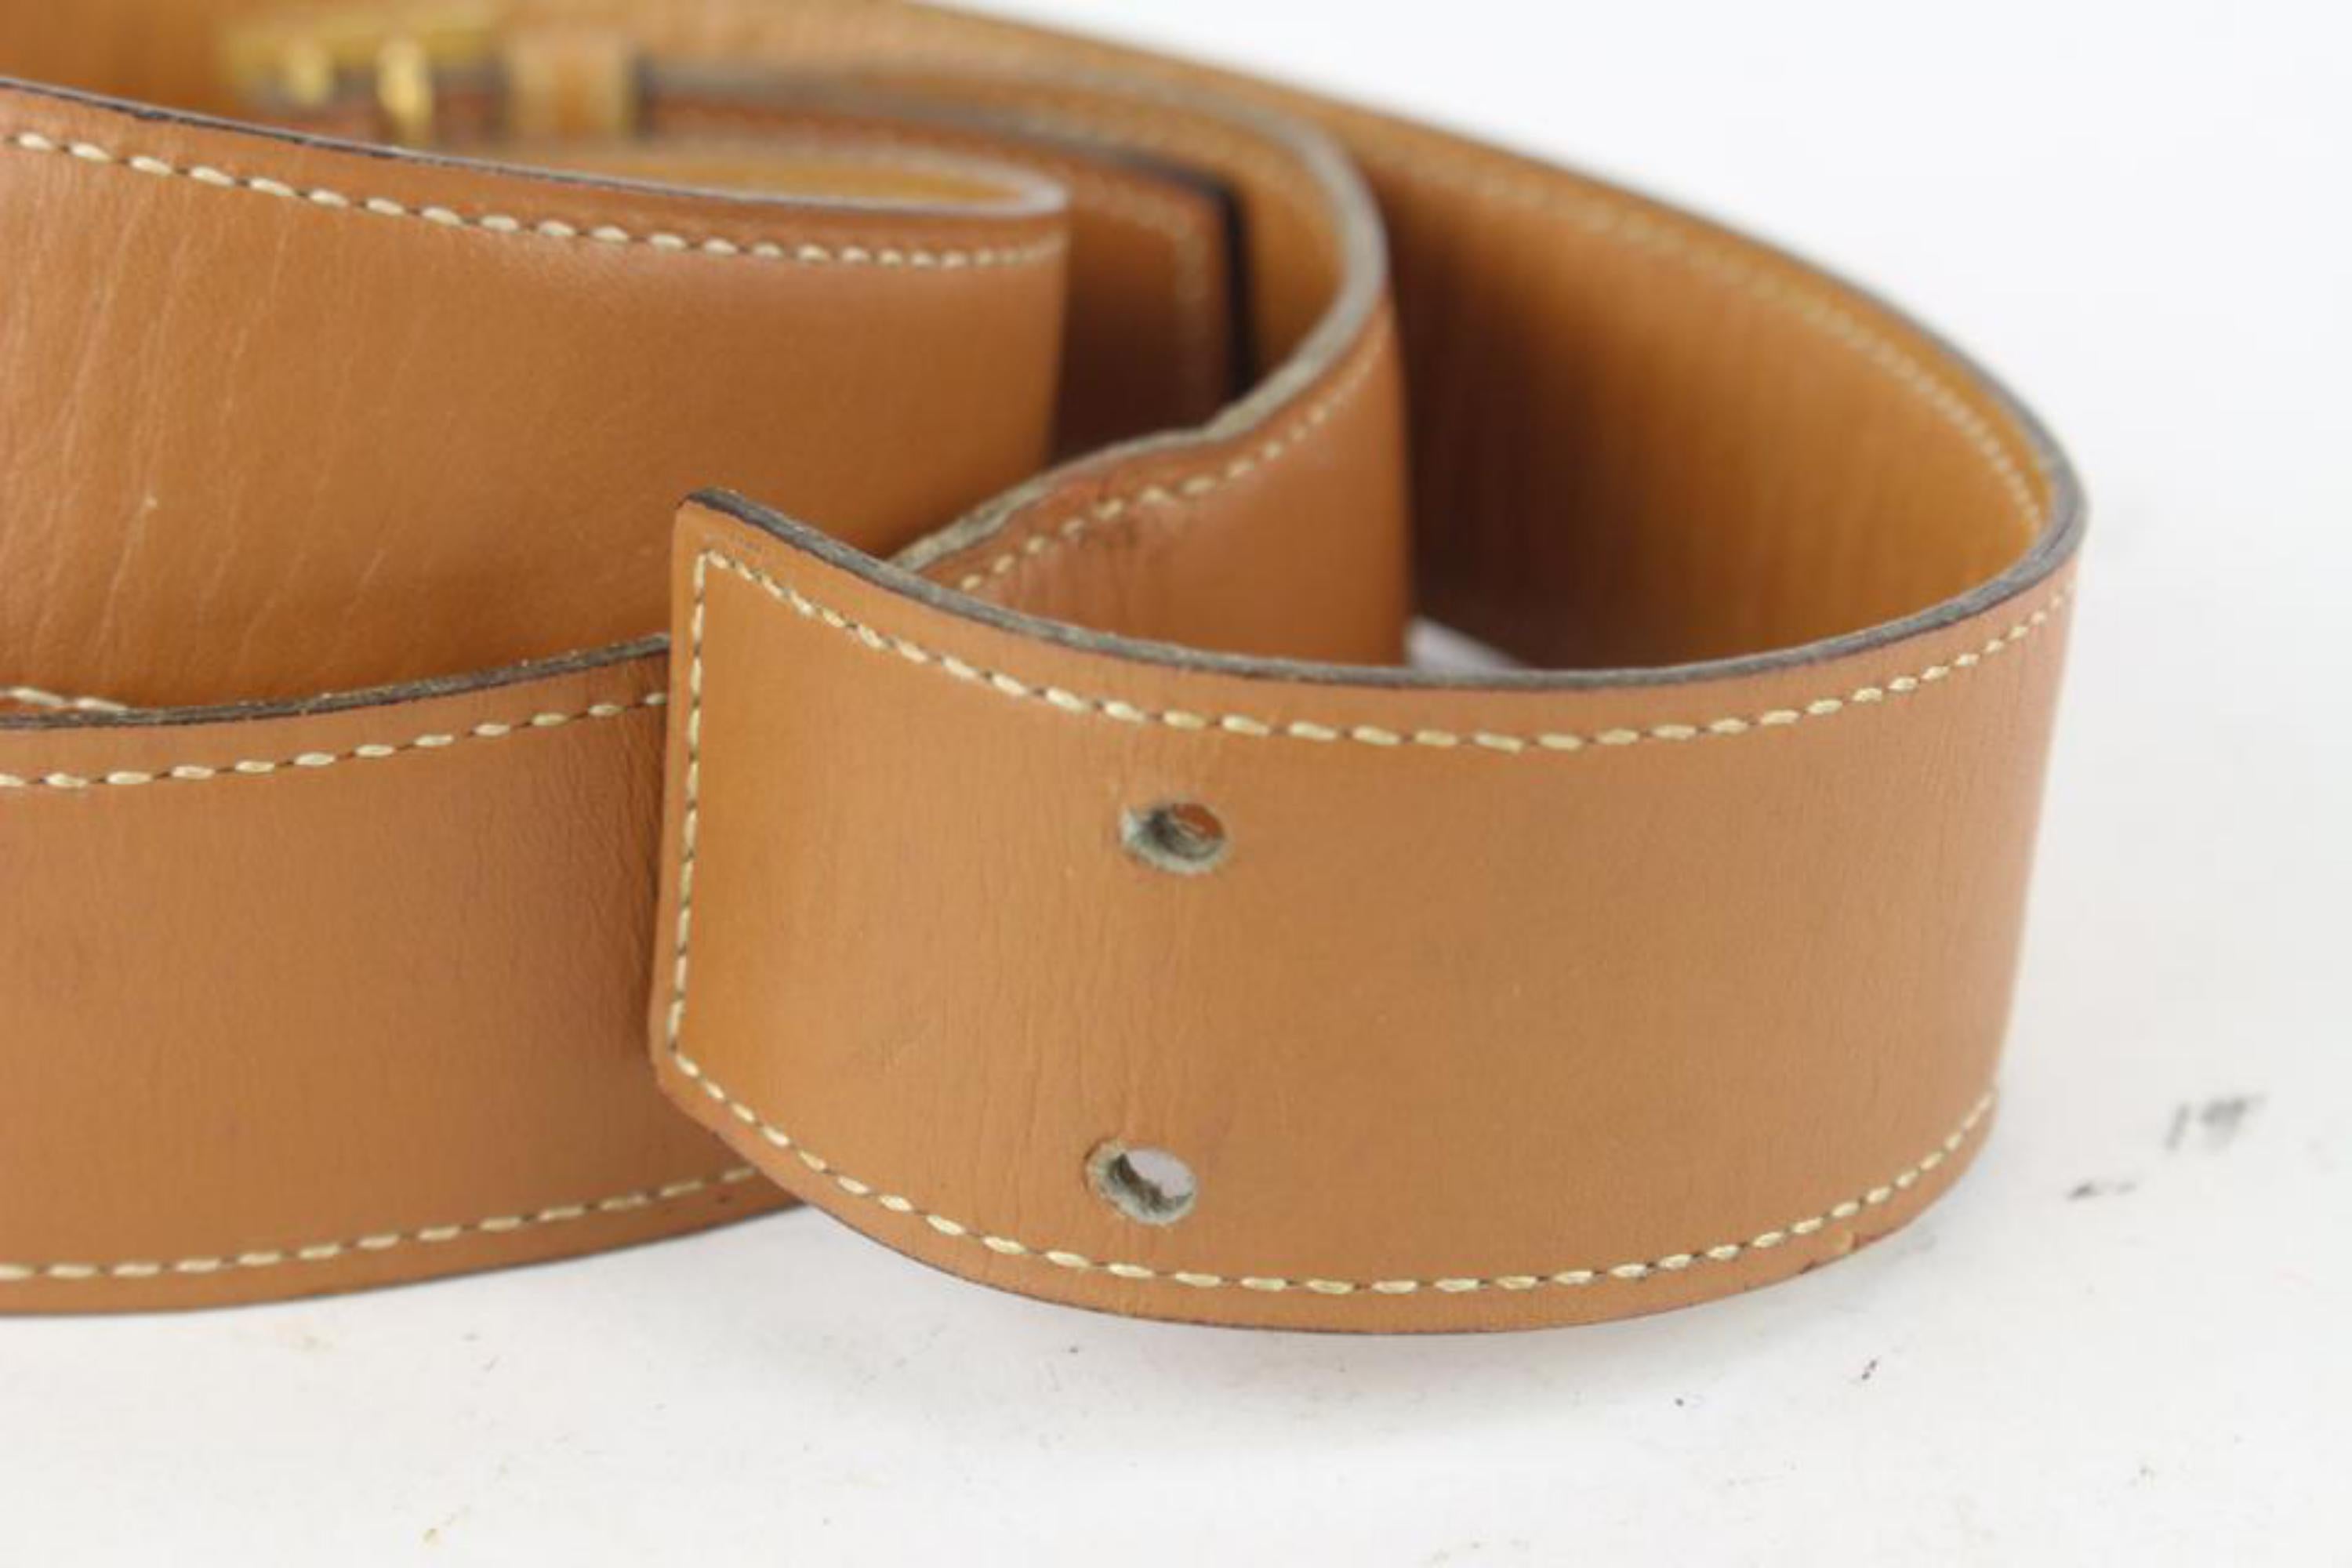 Hermès 32mm Reversible H Logo Belt Kit Brown x Gold 1H124 In Fair Condition For Sale In Dix hills, NY